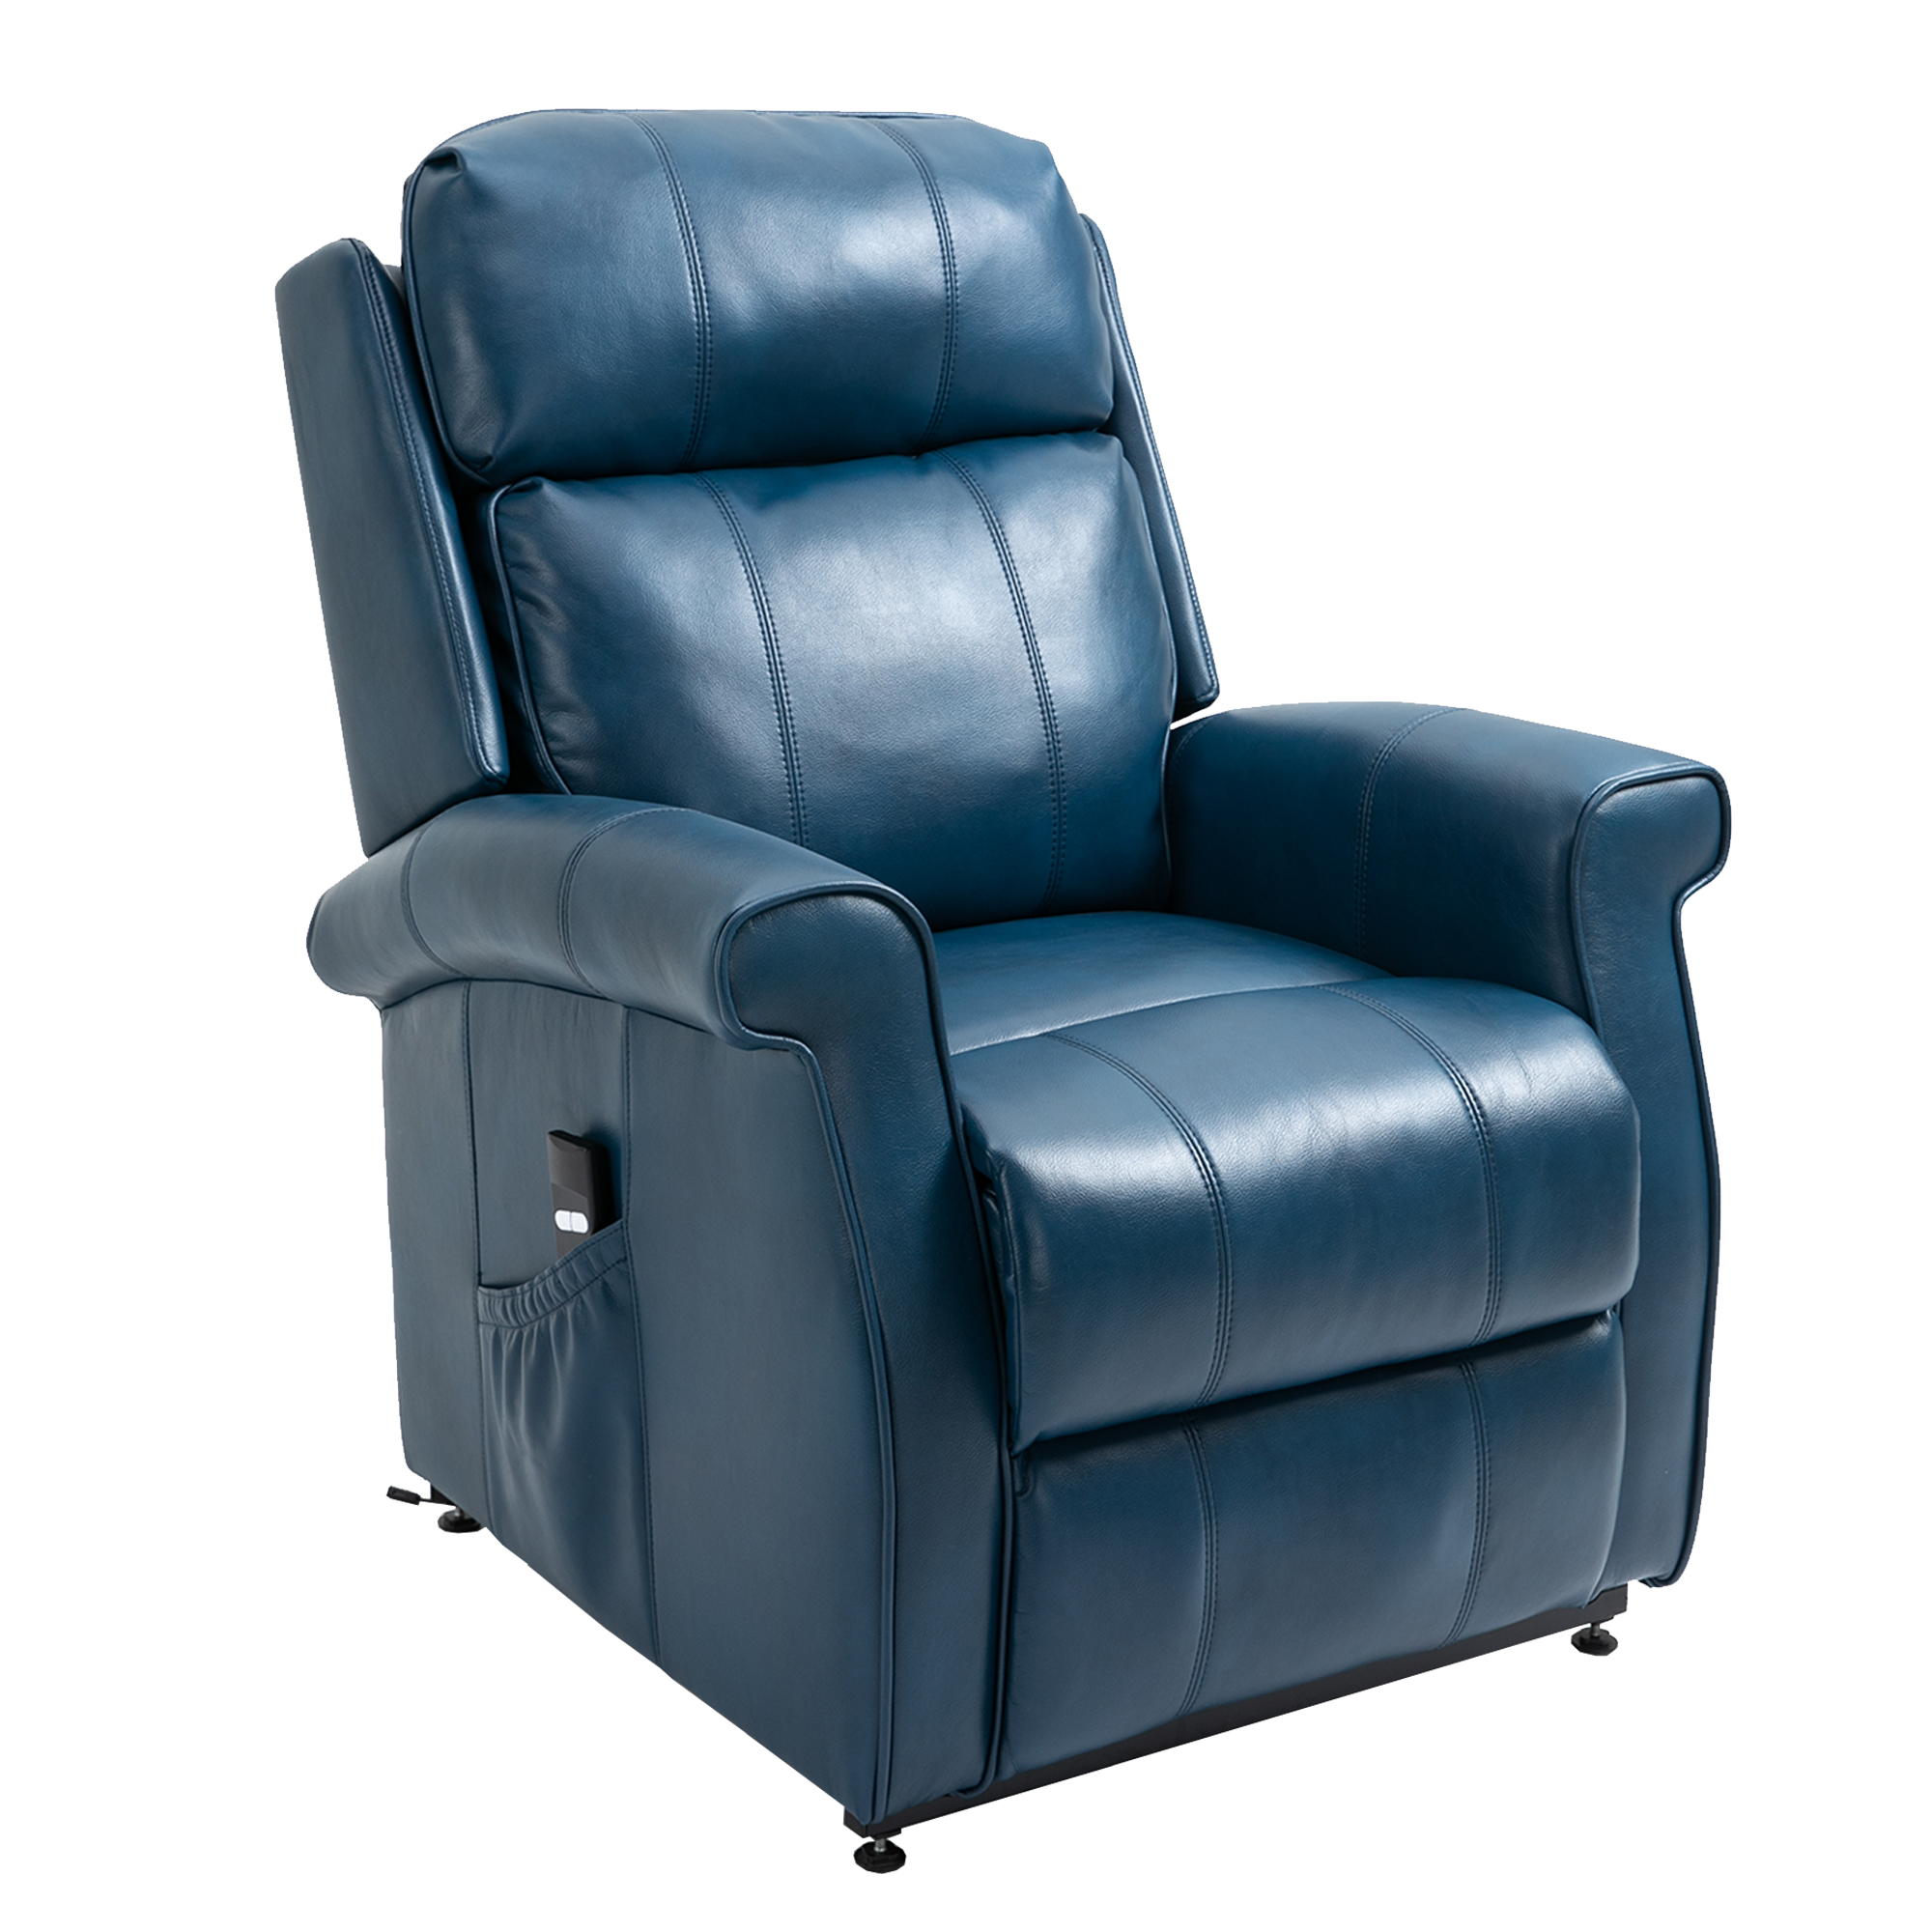 Boyel Living Electric Power Lift Recliner Soft Chair in Blue with 8-Point Massage, 2 Side Pockets,Thickened Pillow(Faux Leather)